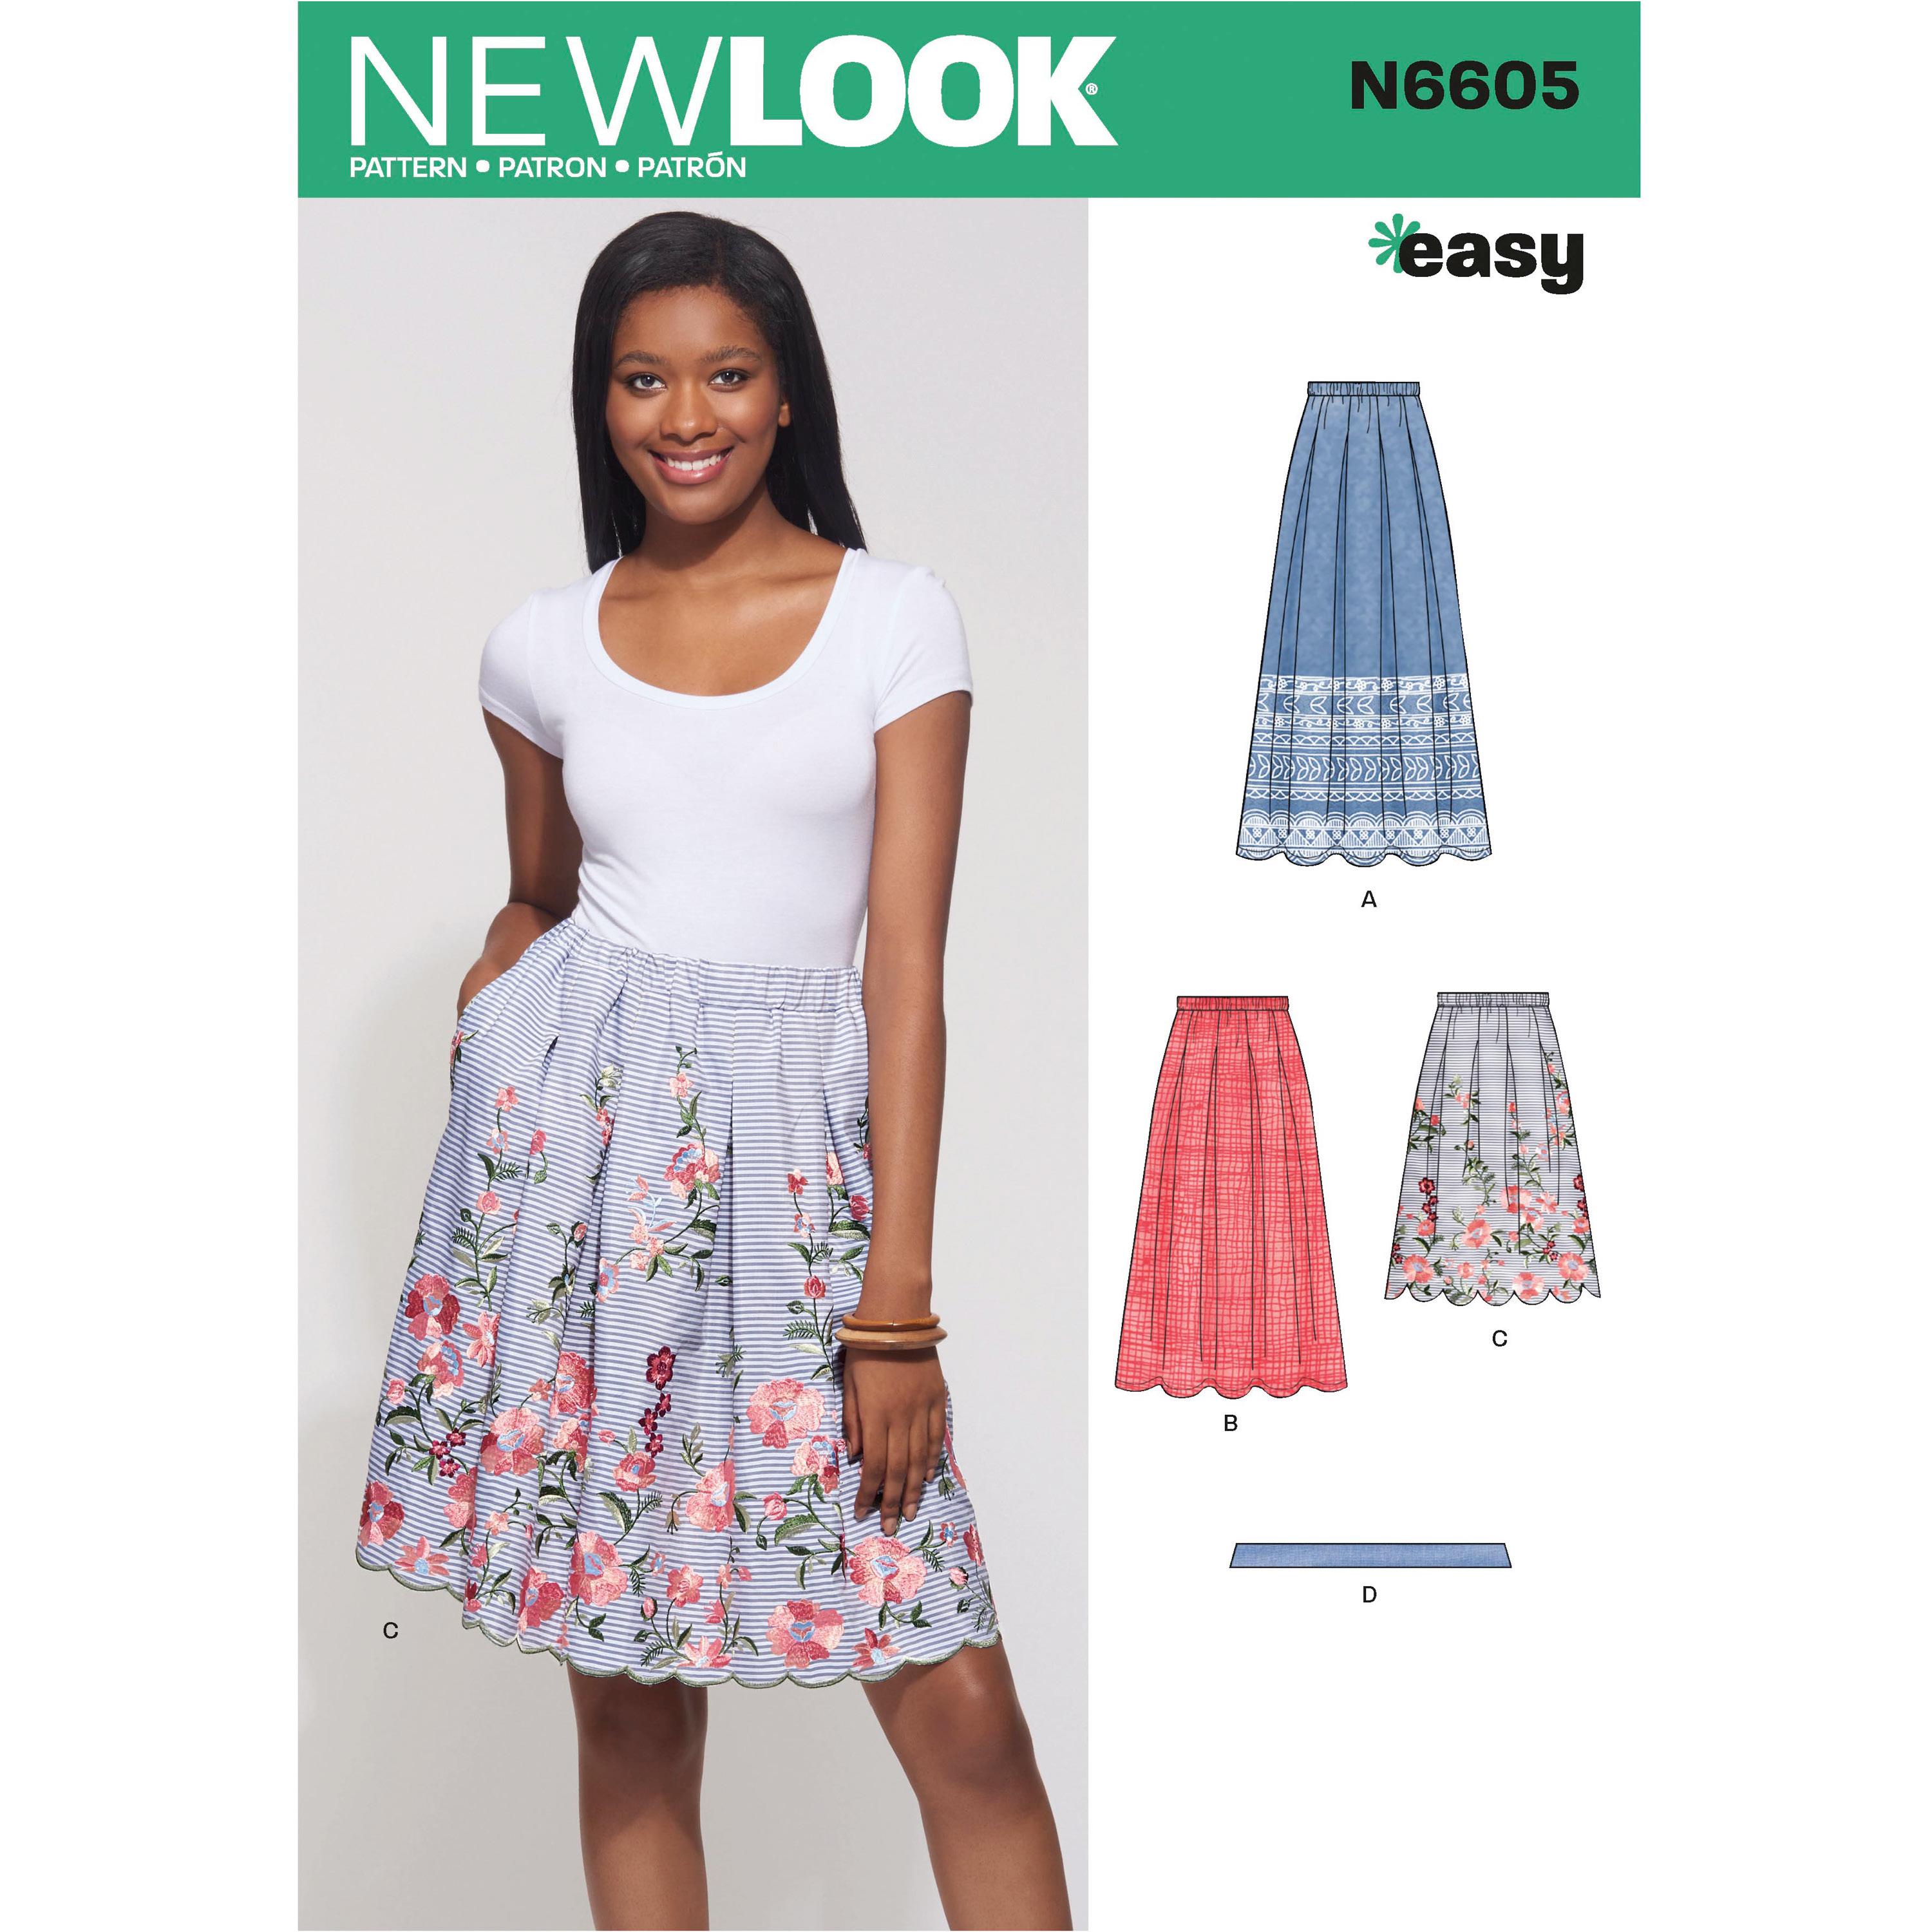 NewLook Sewing Pattern N6605 Misses' Skirt with Neck Tie